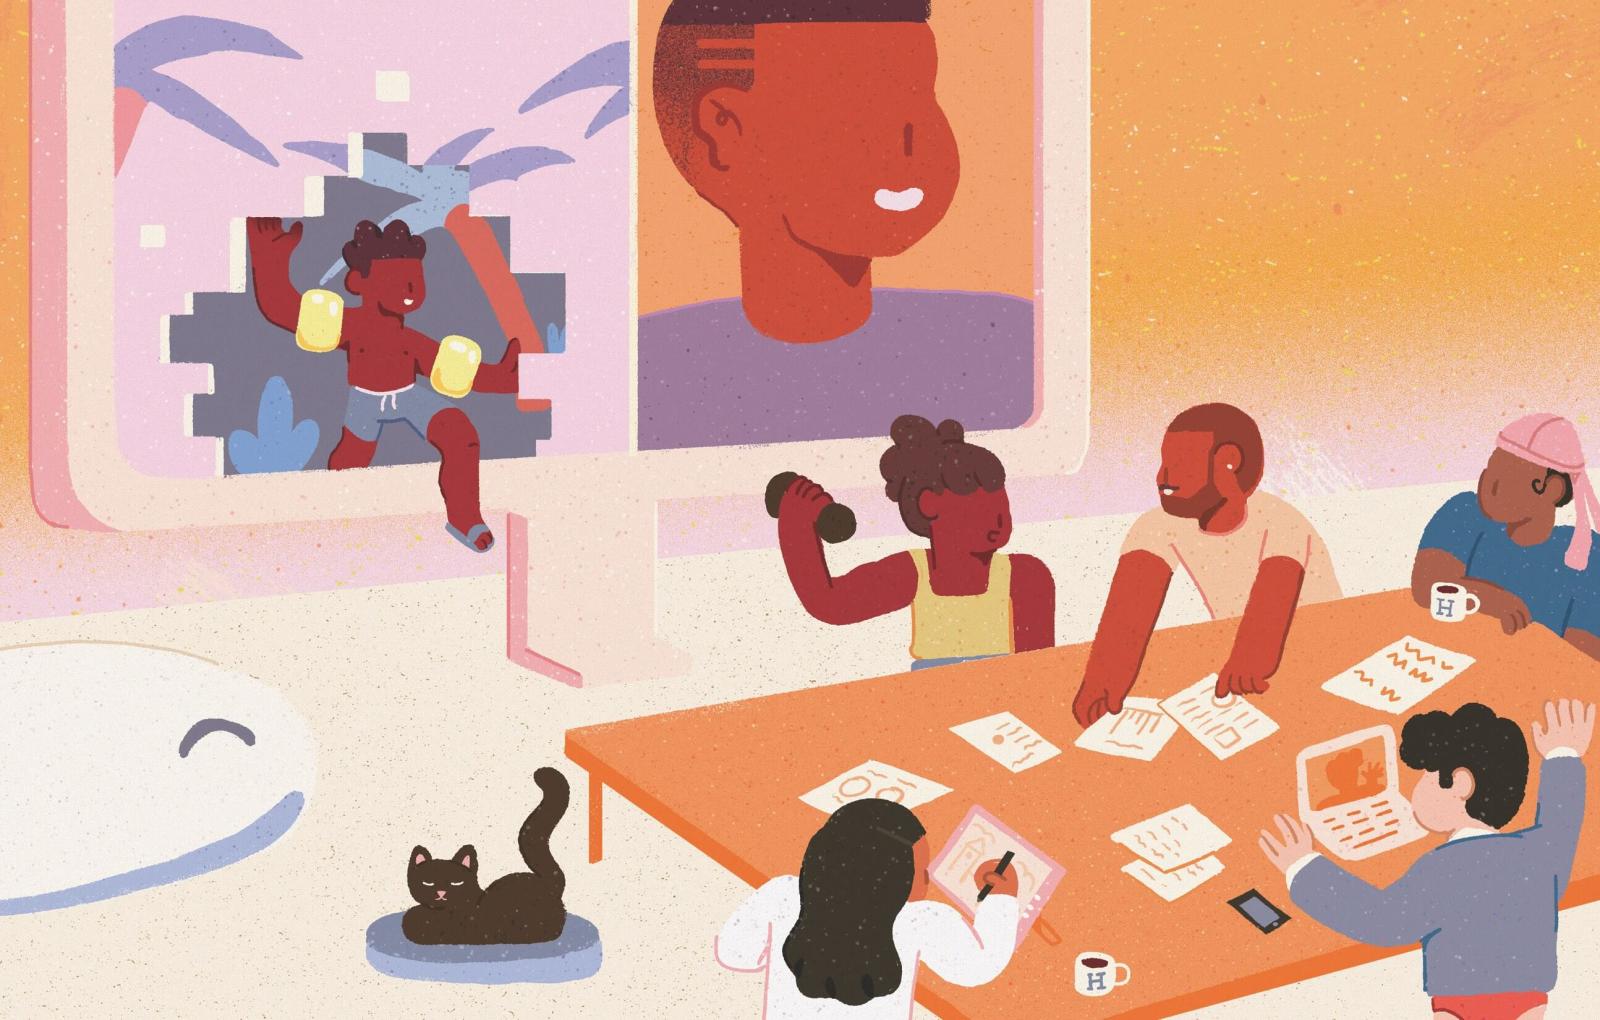 Cartoon image with people sitting around a table working